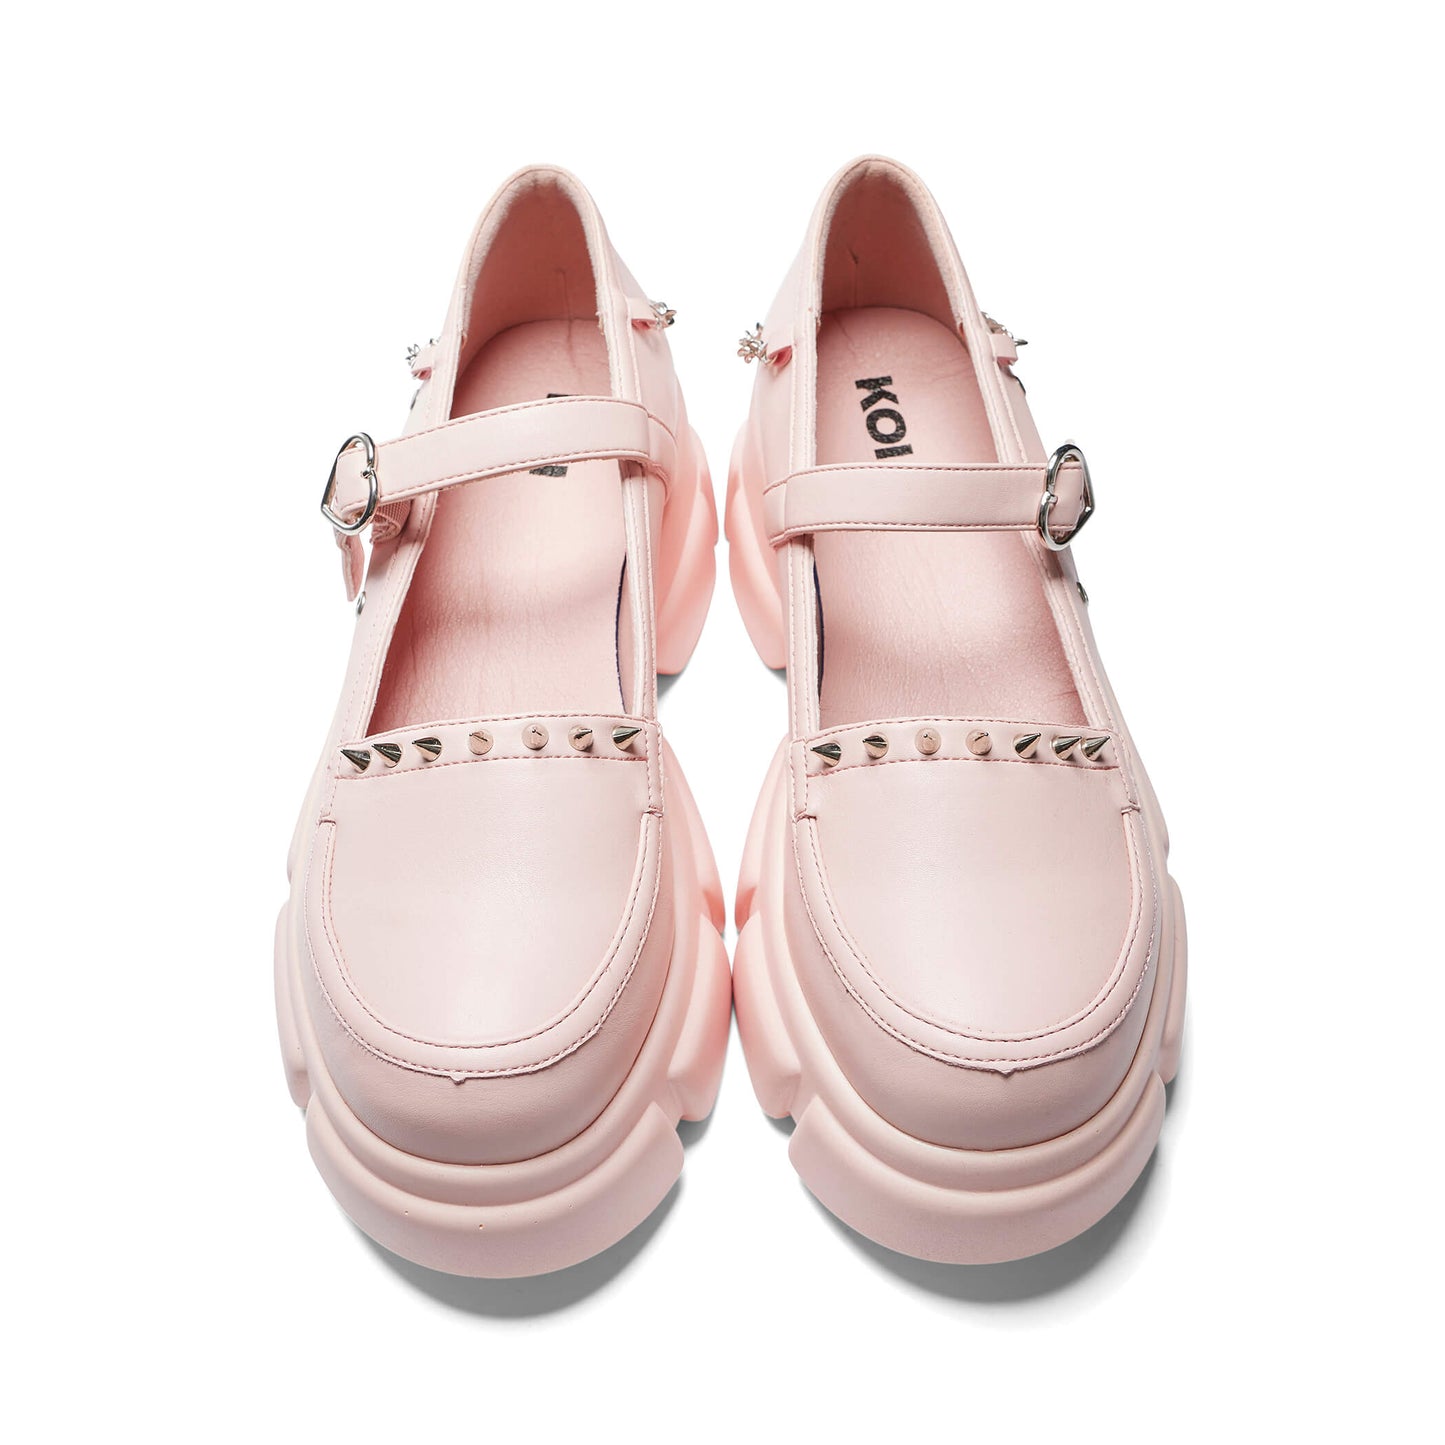 Cloud Mist Chunky Shoes - Baby Pink - Shoes - KOI Footwear - Pink - Top View